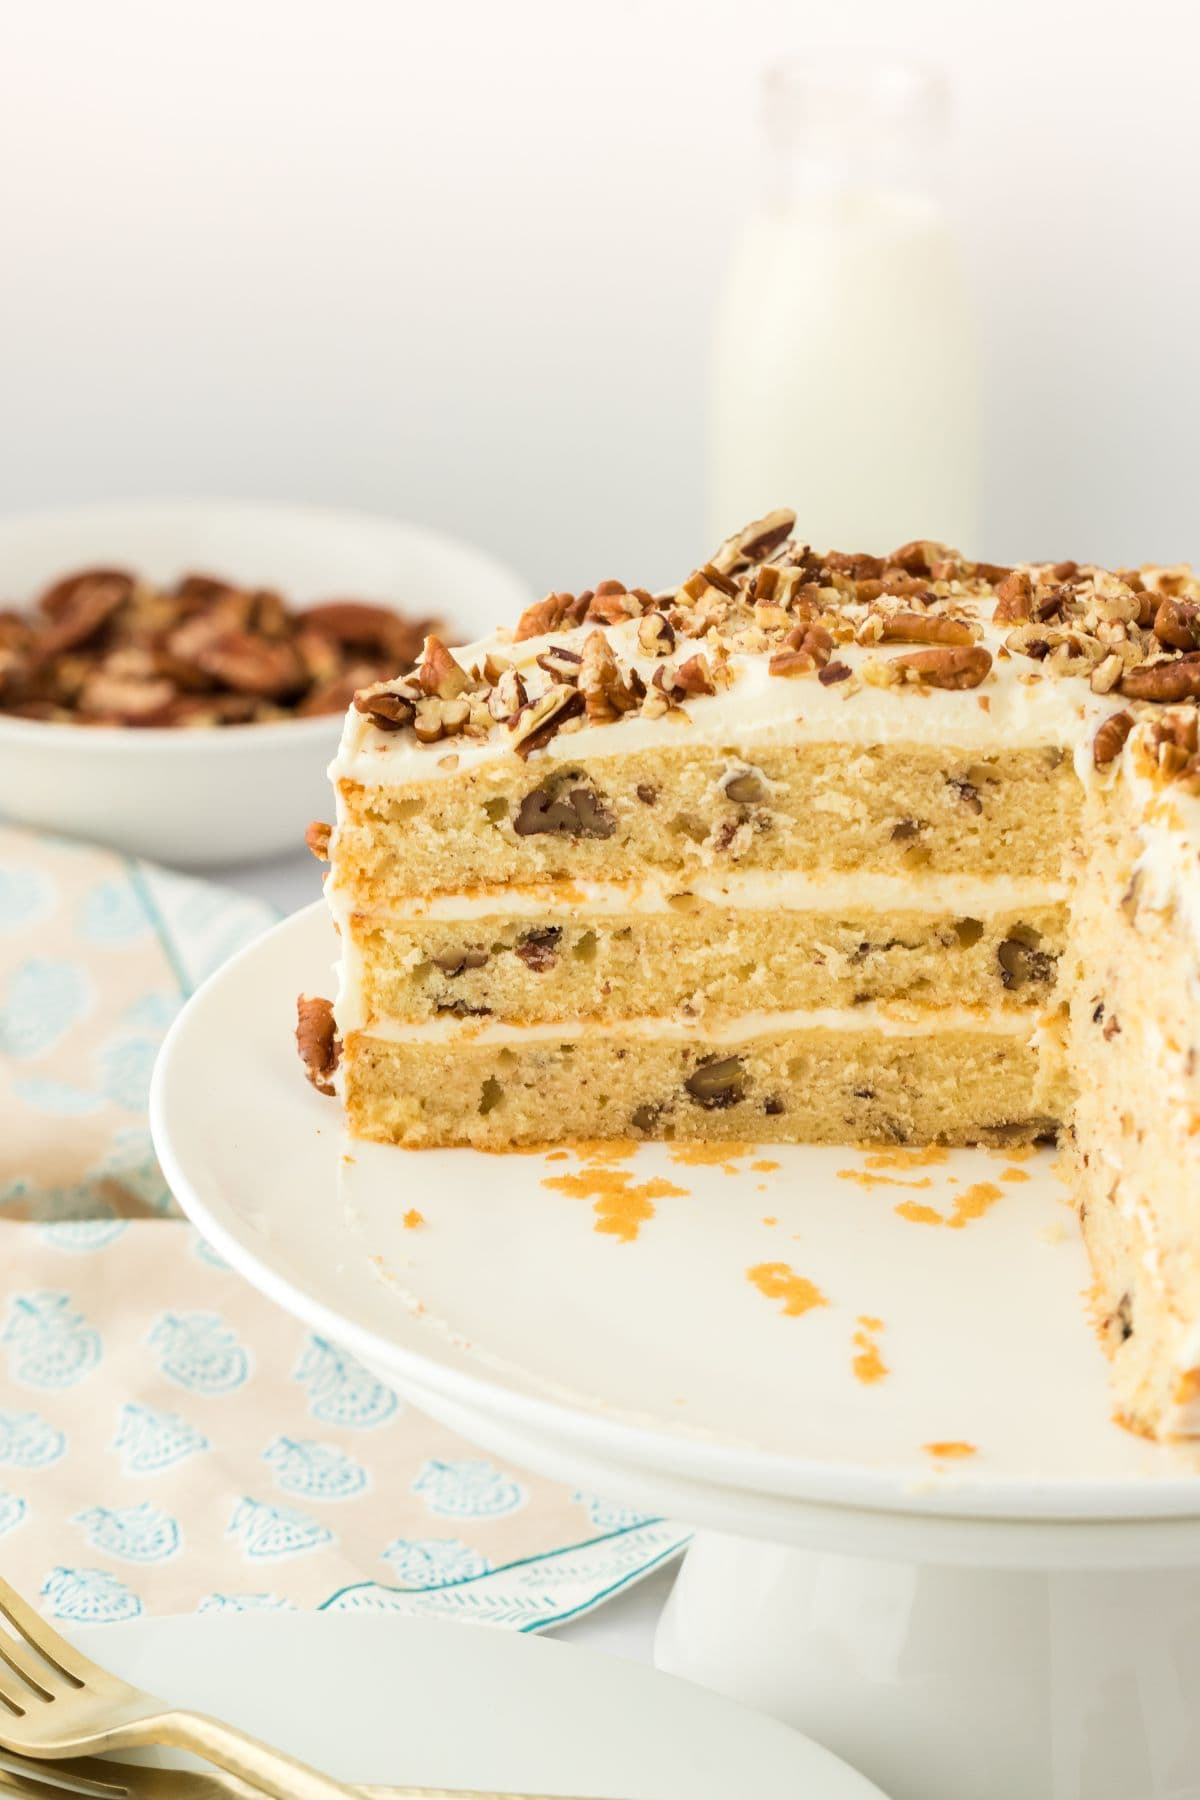 Butter pecan cake with slices missing on a white cake stand